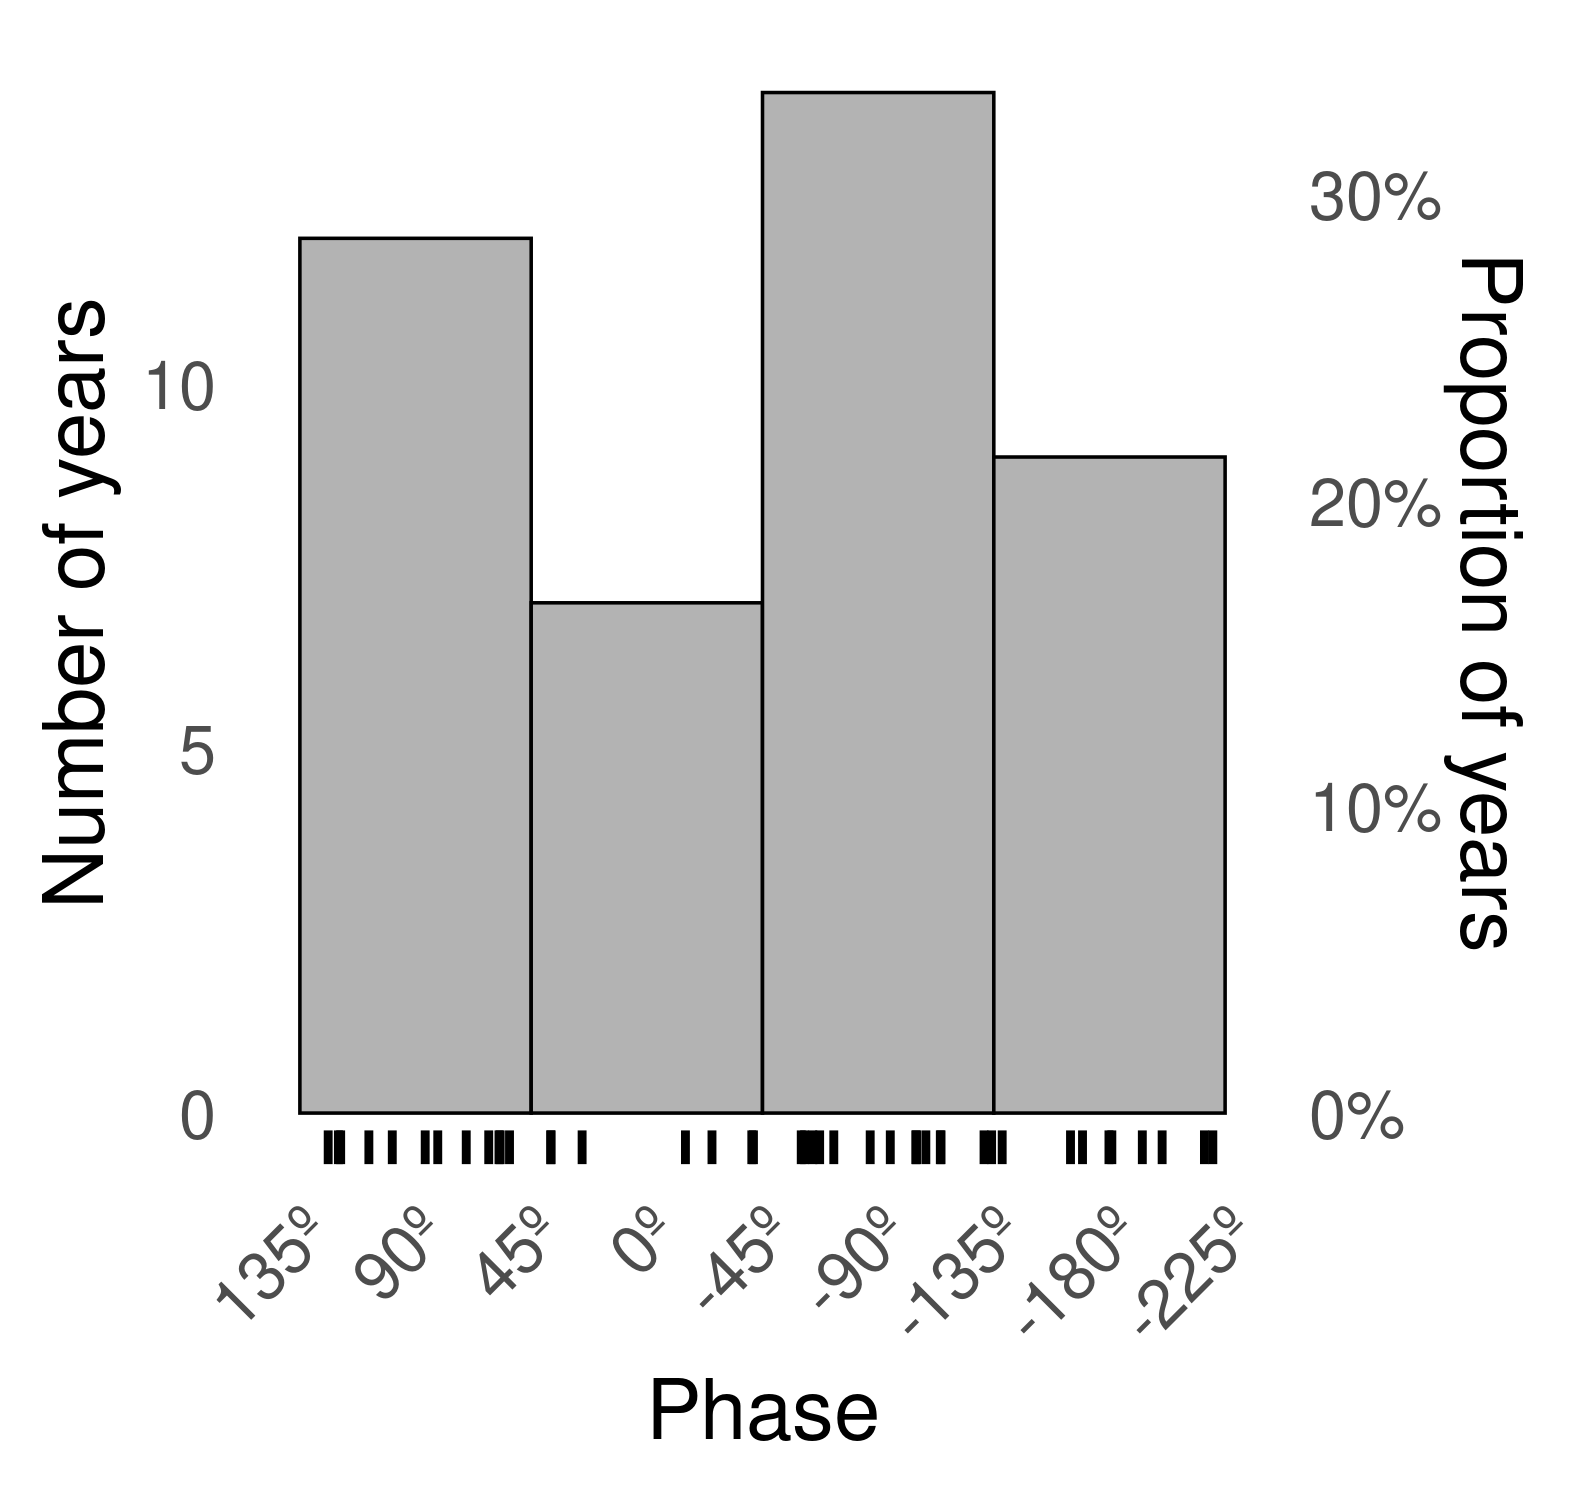 Histogram of phase distribution of cEOF2 phase for the 1979 – 2019 period. Bins are centred at 90º, 0º, -90º, -180º with a binwidth of 90º. The small vertical lines near the horizontal axis mark the observations.